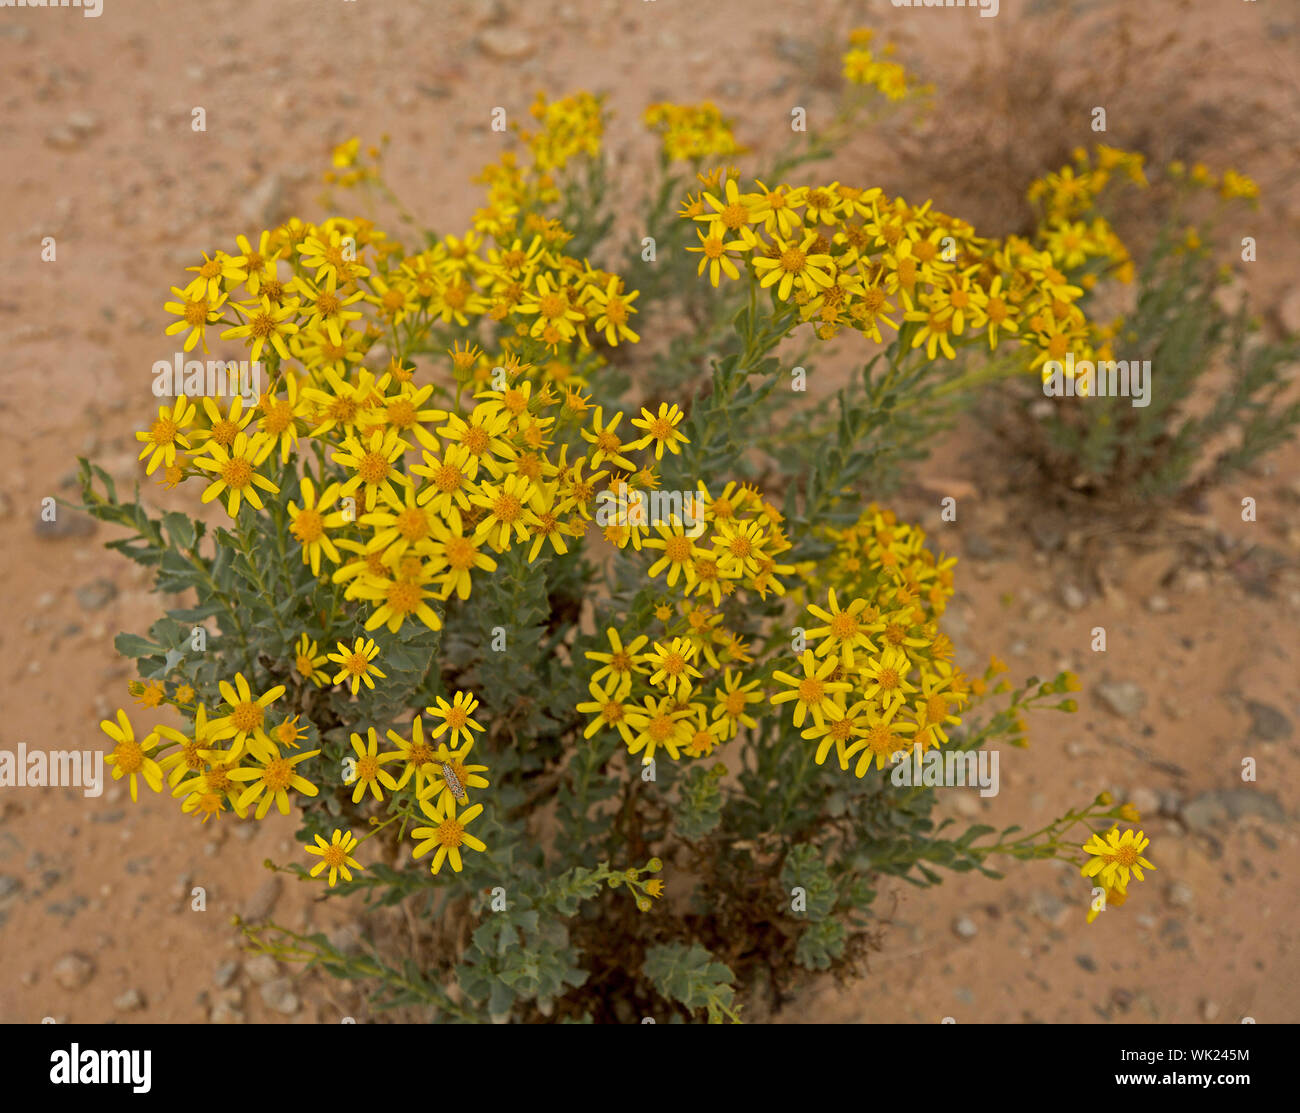 Cluster of yellow flowers & green foliage of Senecio magnificus, Showy Groundsel, against background of sandy soil in outback Australia during drought Stock Photo